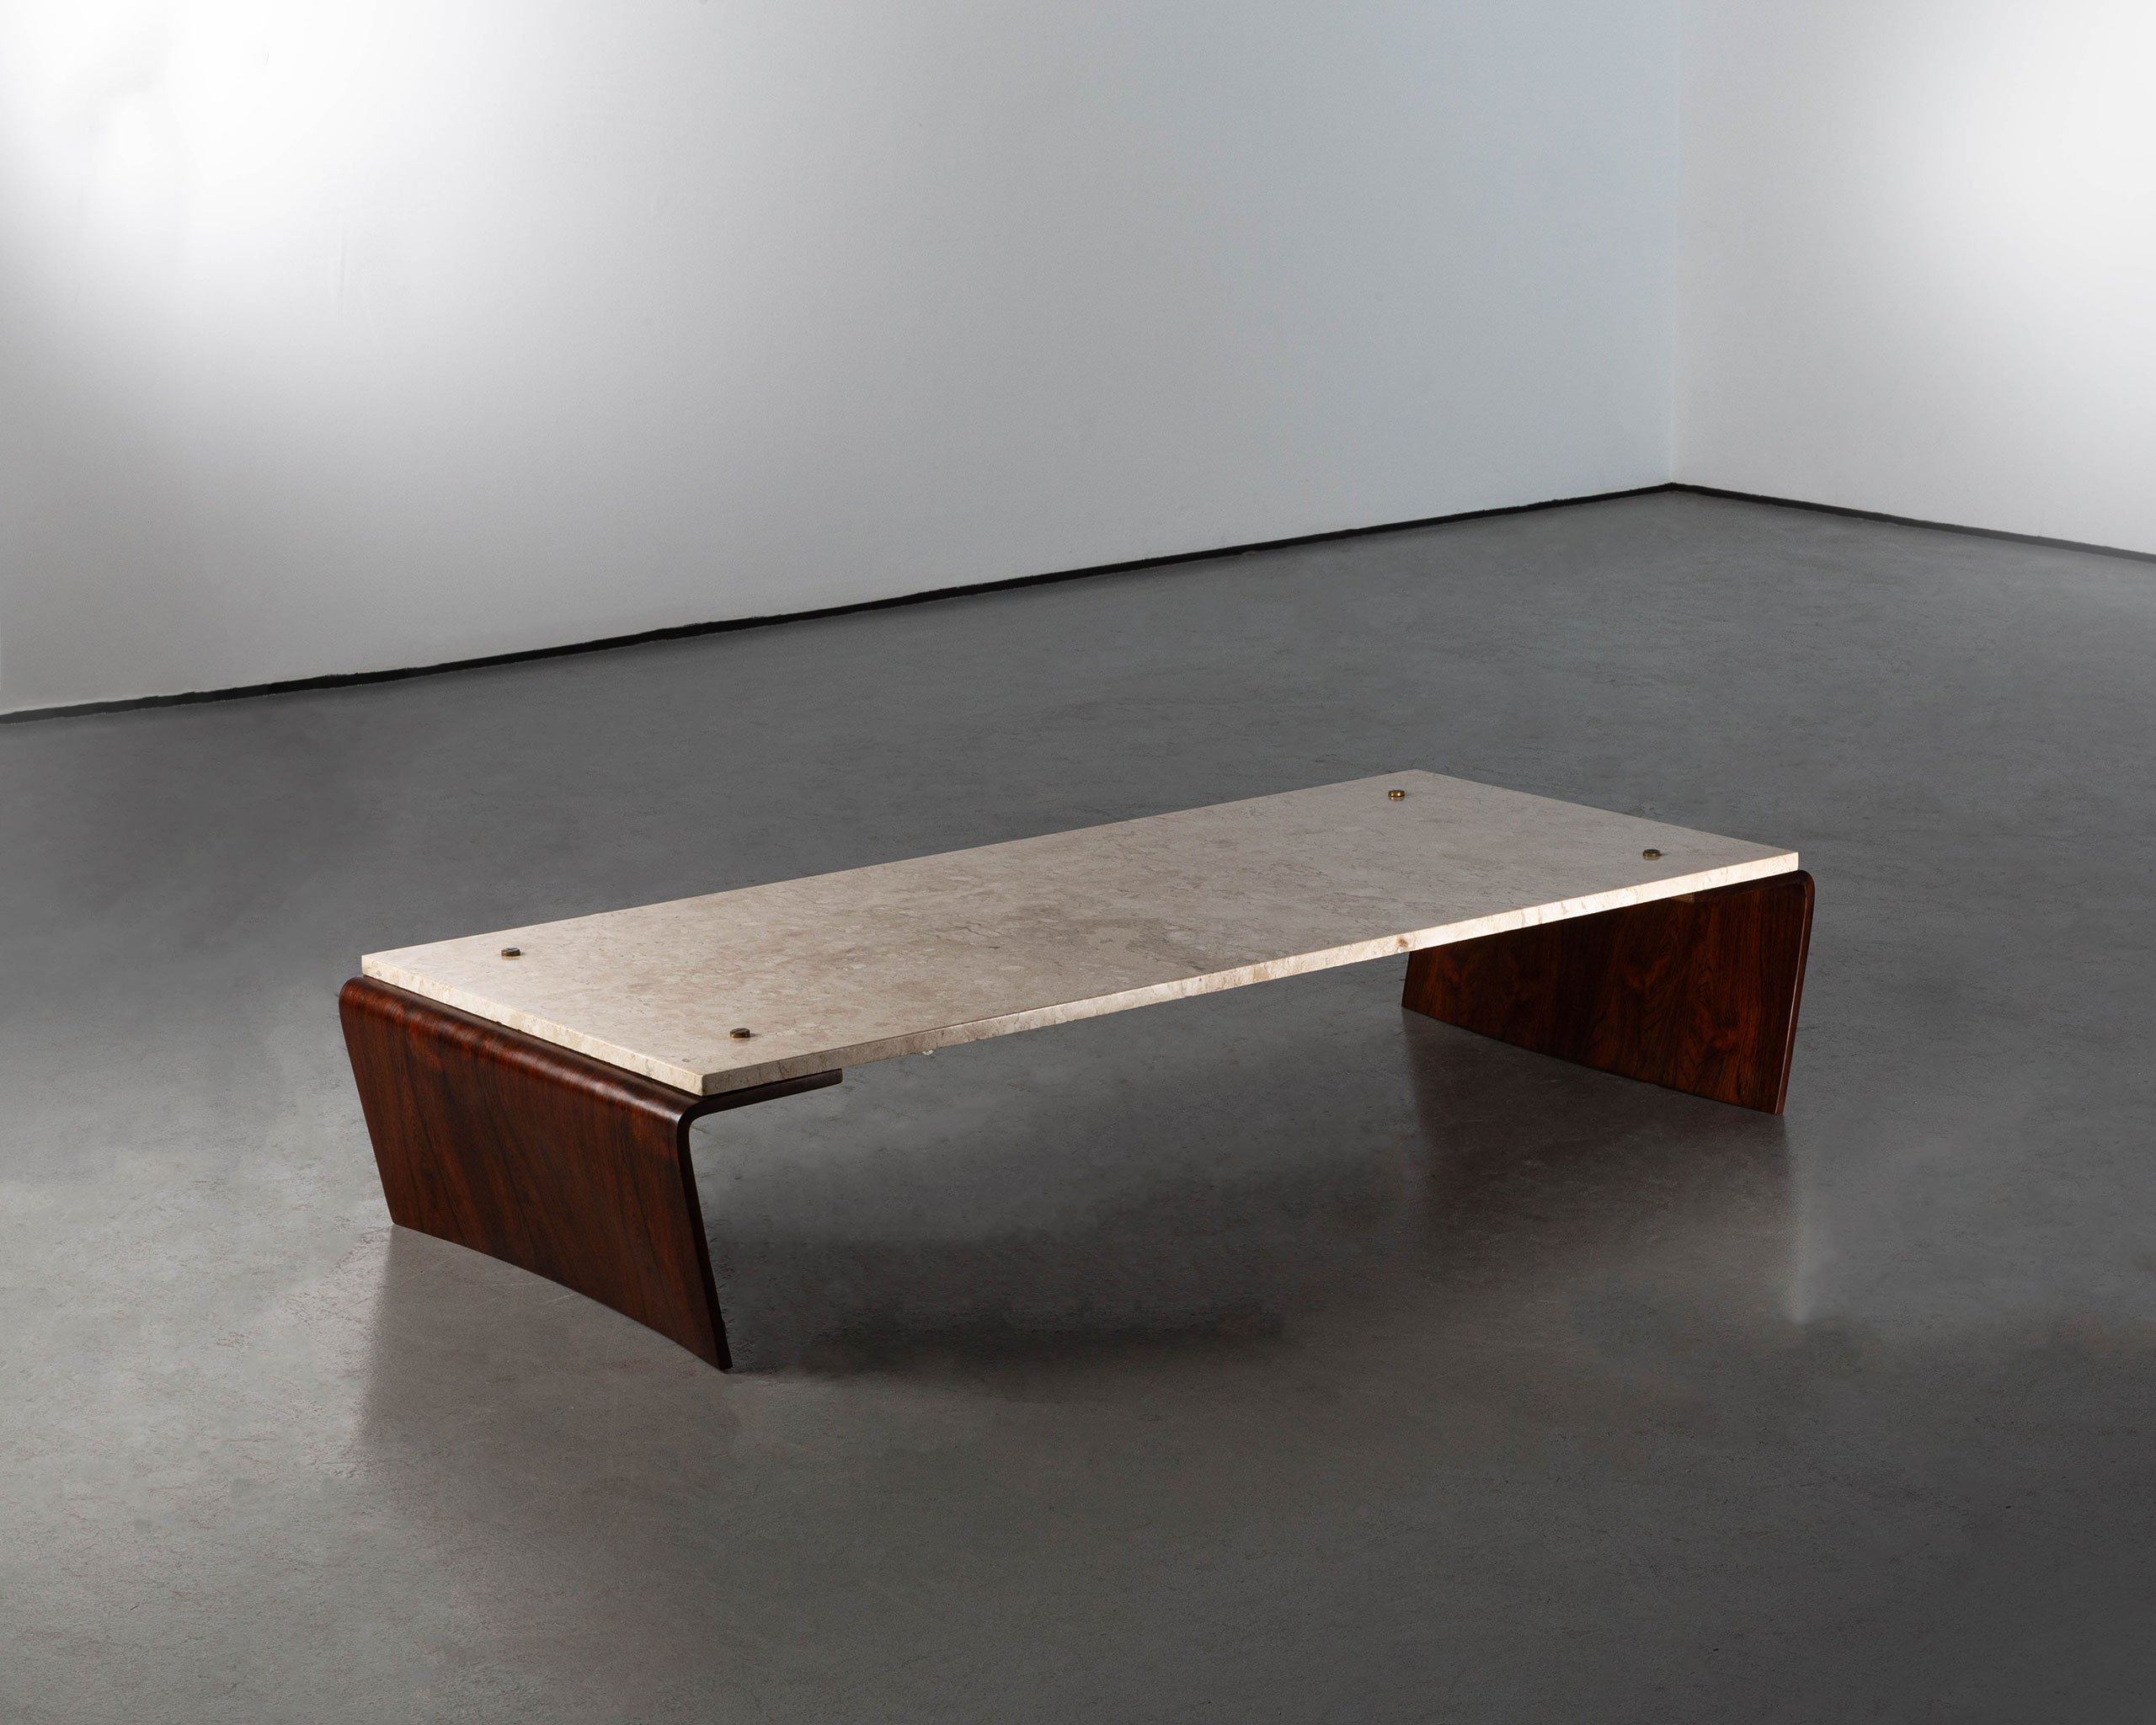 Romana Coffee Table by Jorge Zalszupin. Photography © Carpenters Workshop Gallery.